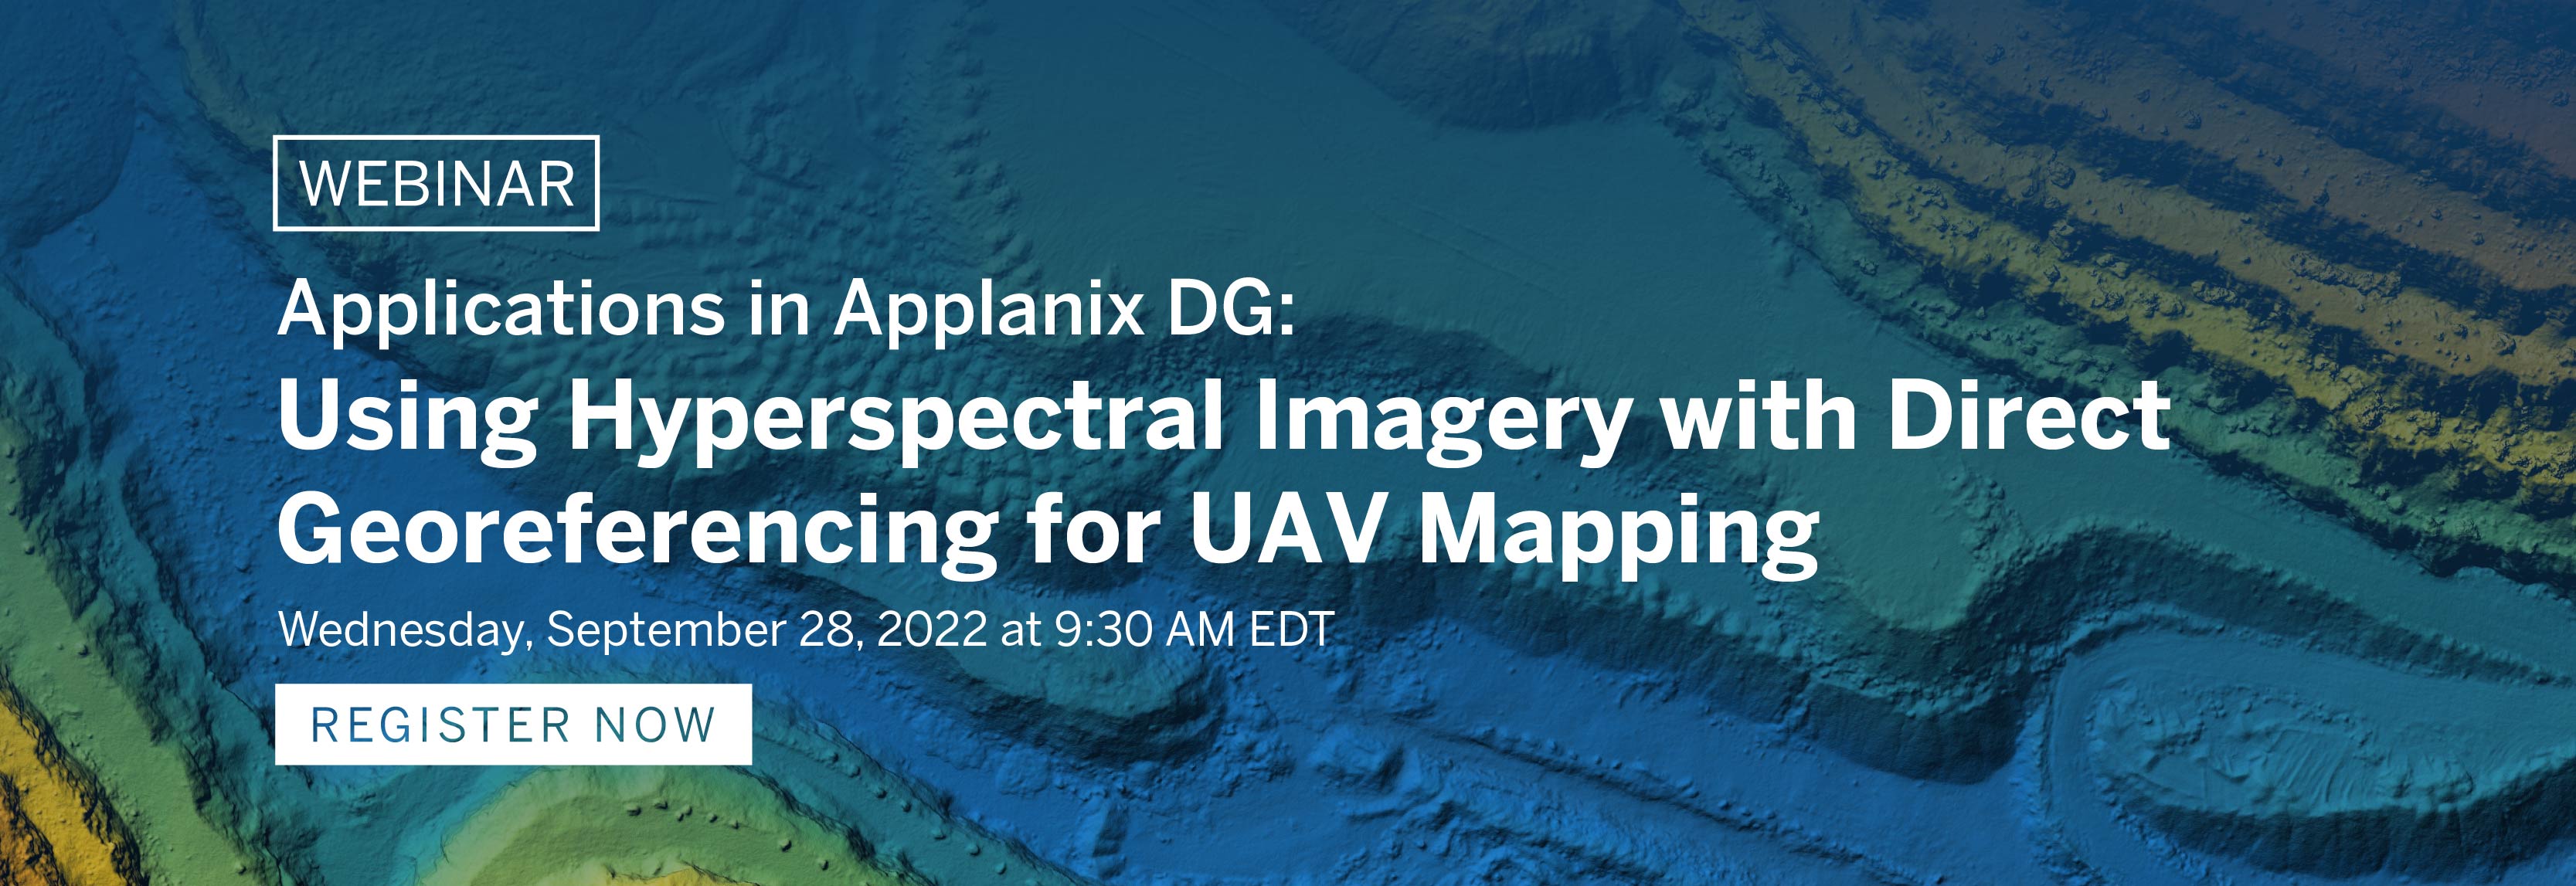 Register for our webinar on Using Hyperspectral Imagery with Direct Georeferencing for UAV Mapping from our Applications in Applanix DG webinar series! | Wednesday, September 28, 2022 at 9:30 AM EDT